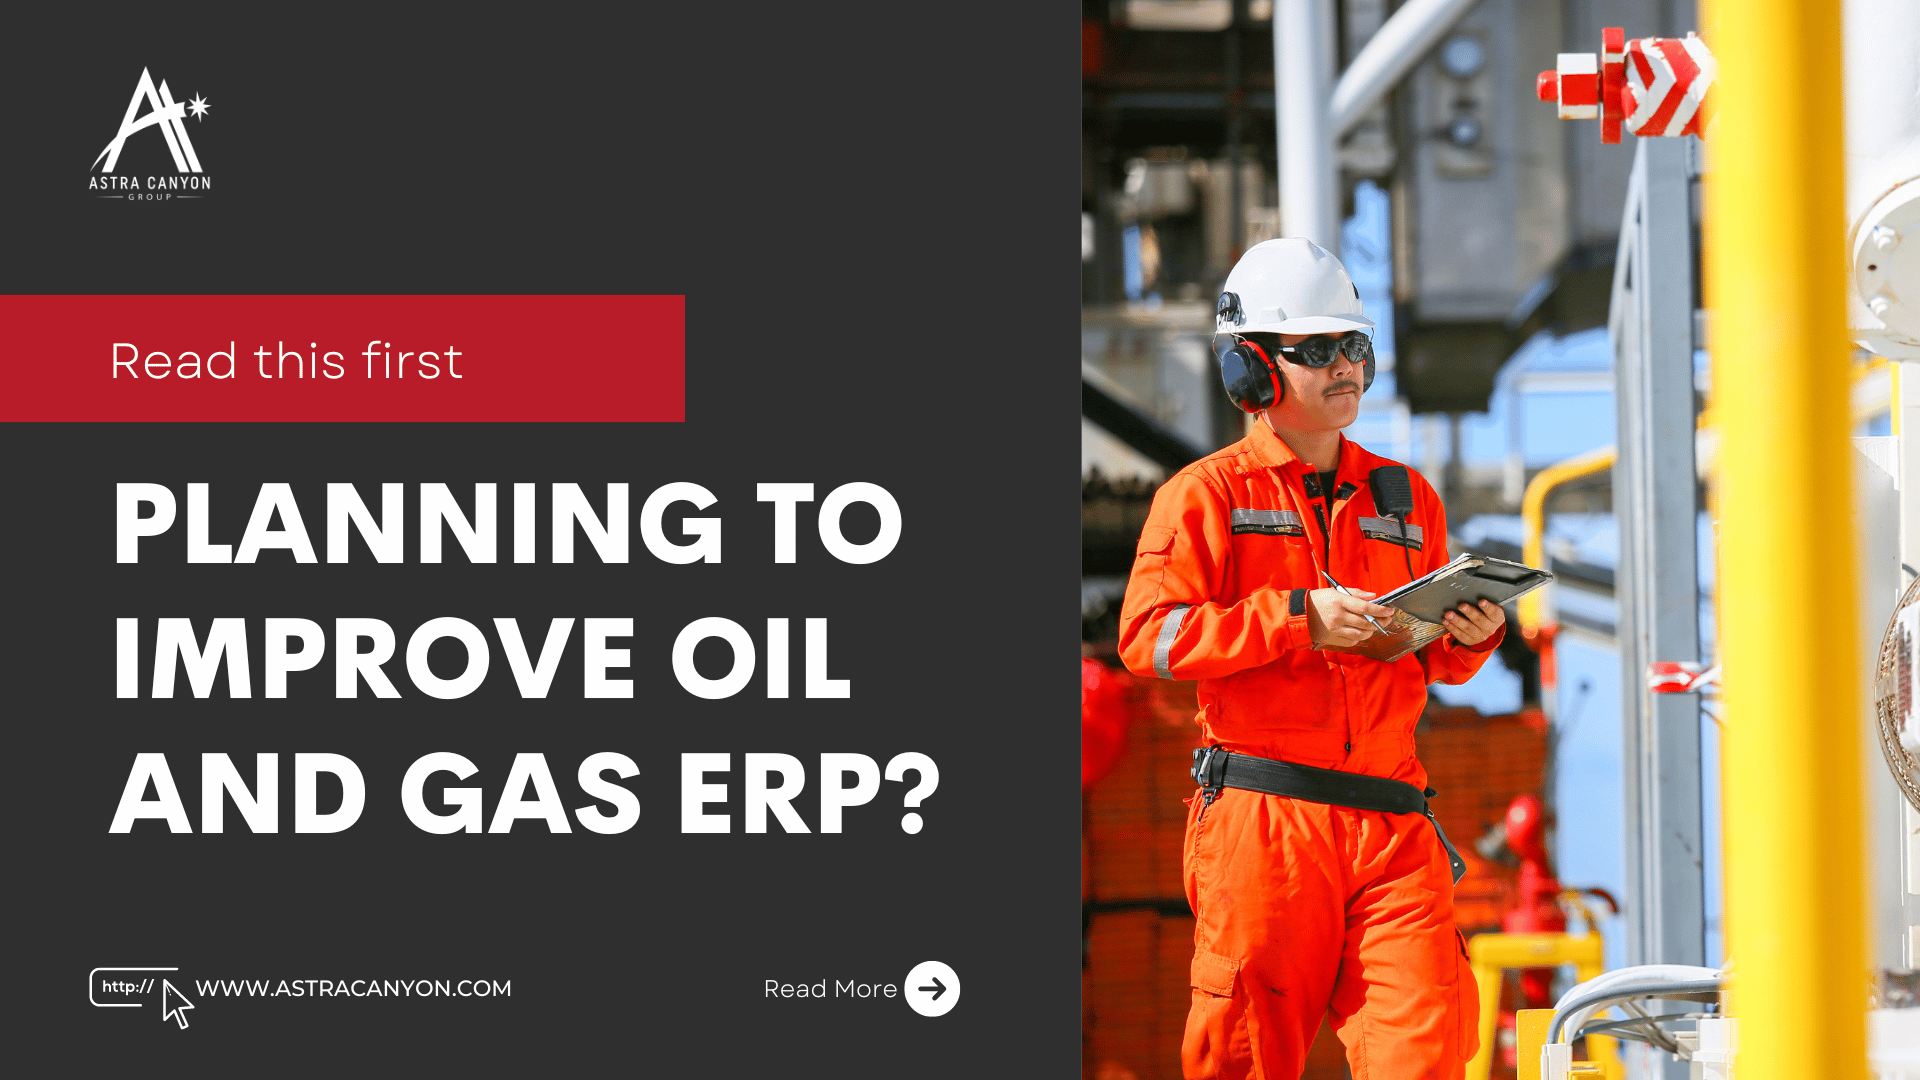 Looking to upgrade your company’s Oil and Gas ERP? 4 Critical Factors to Consider